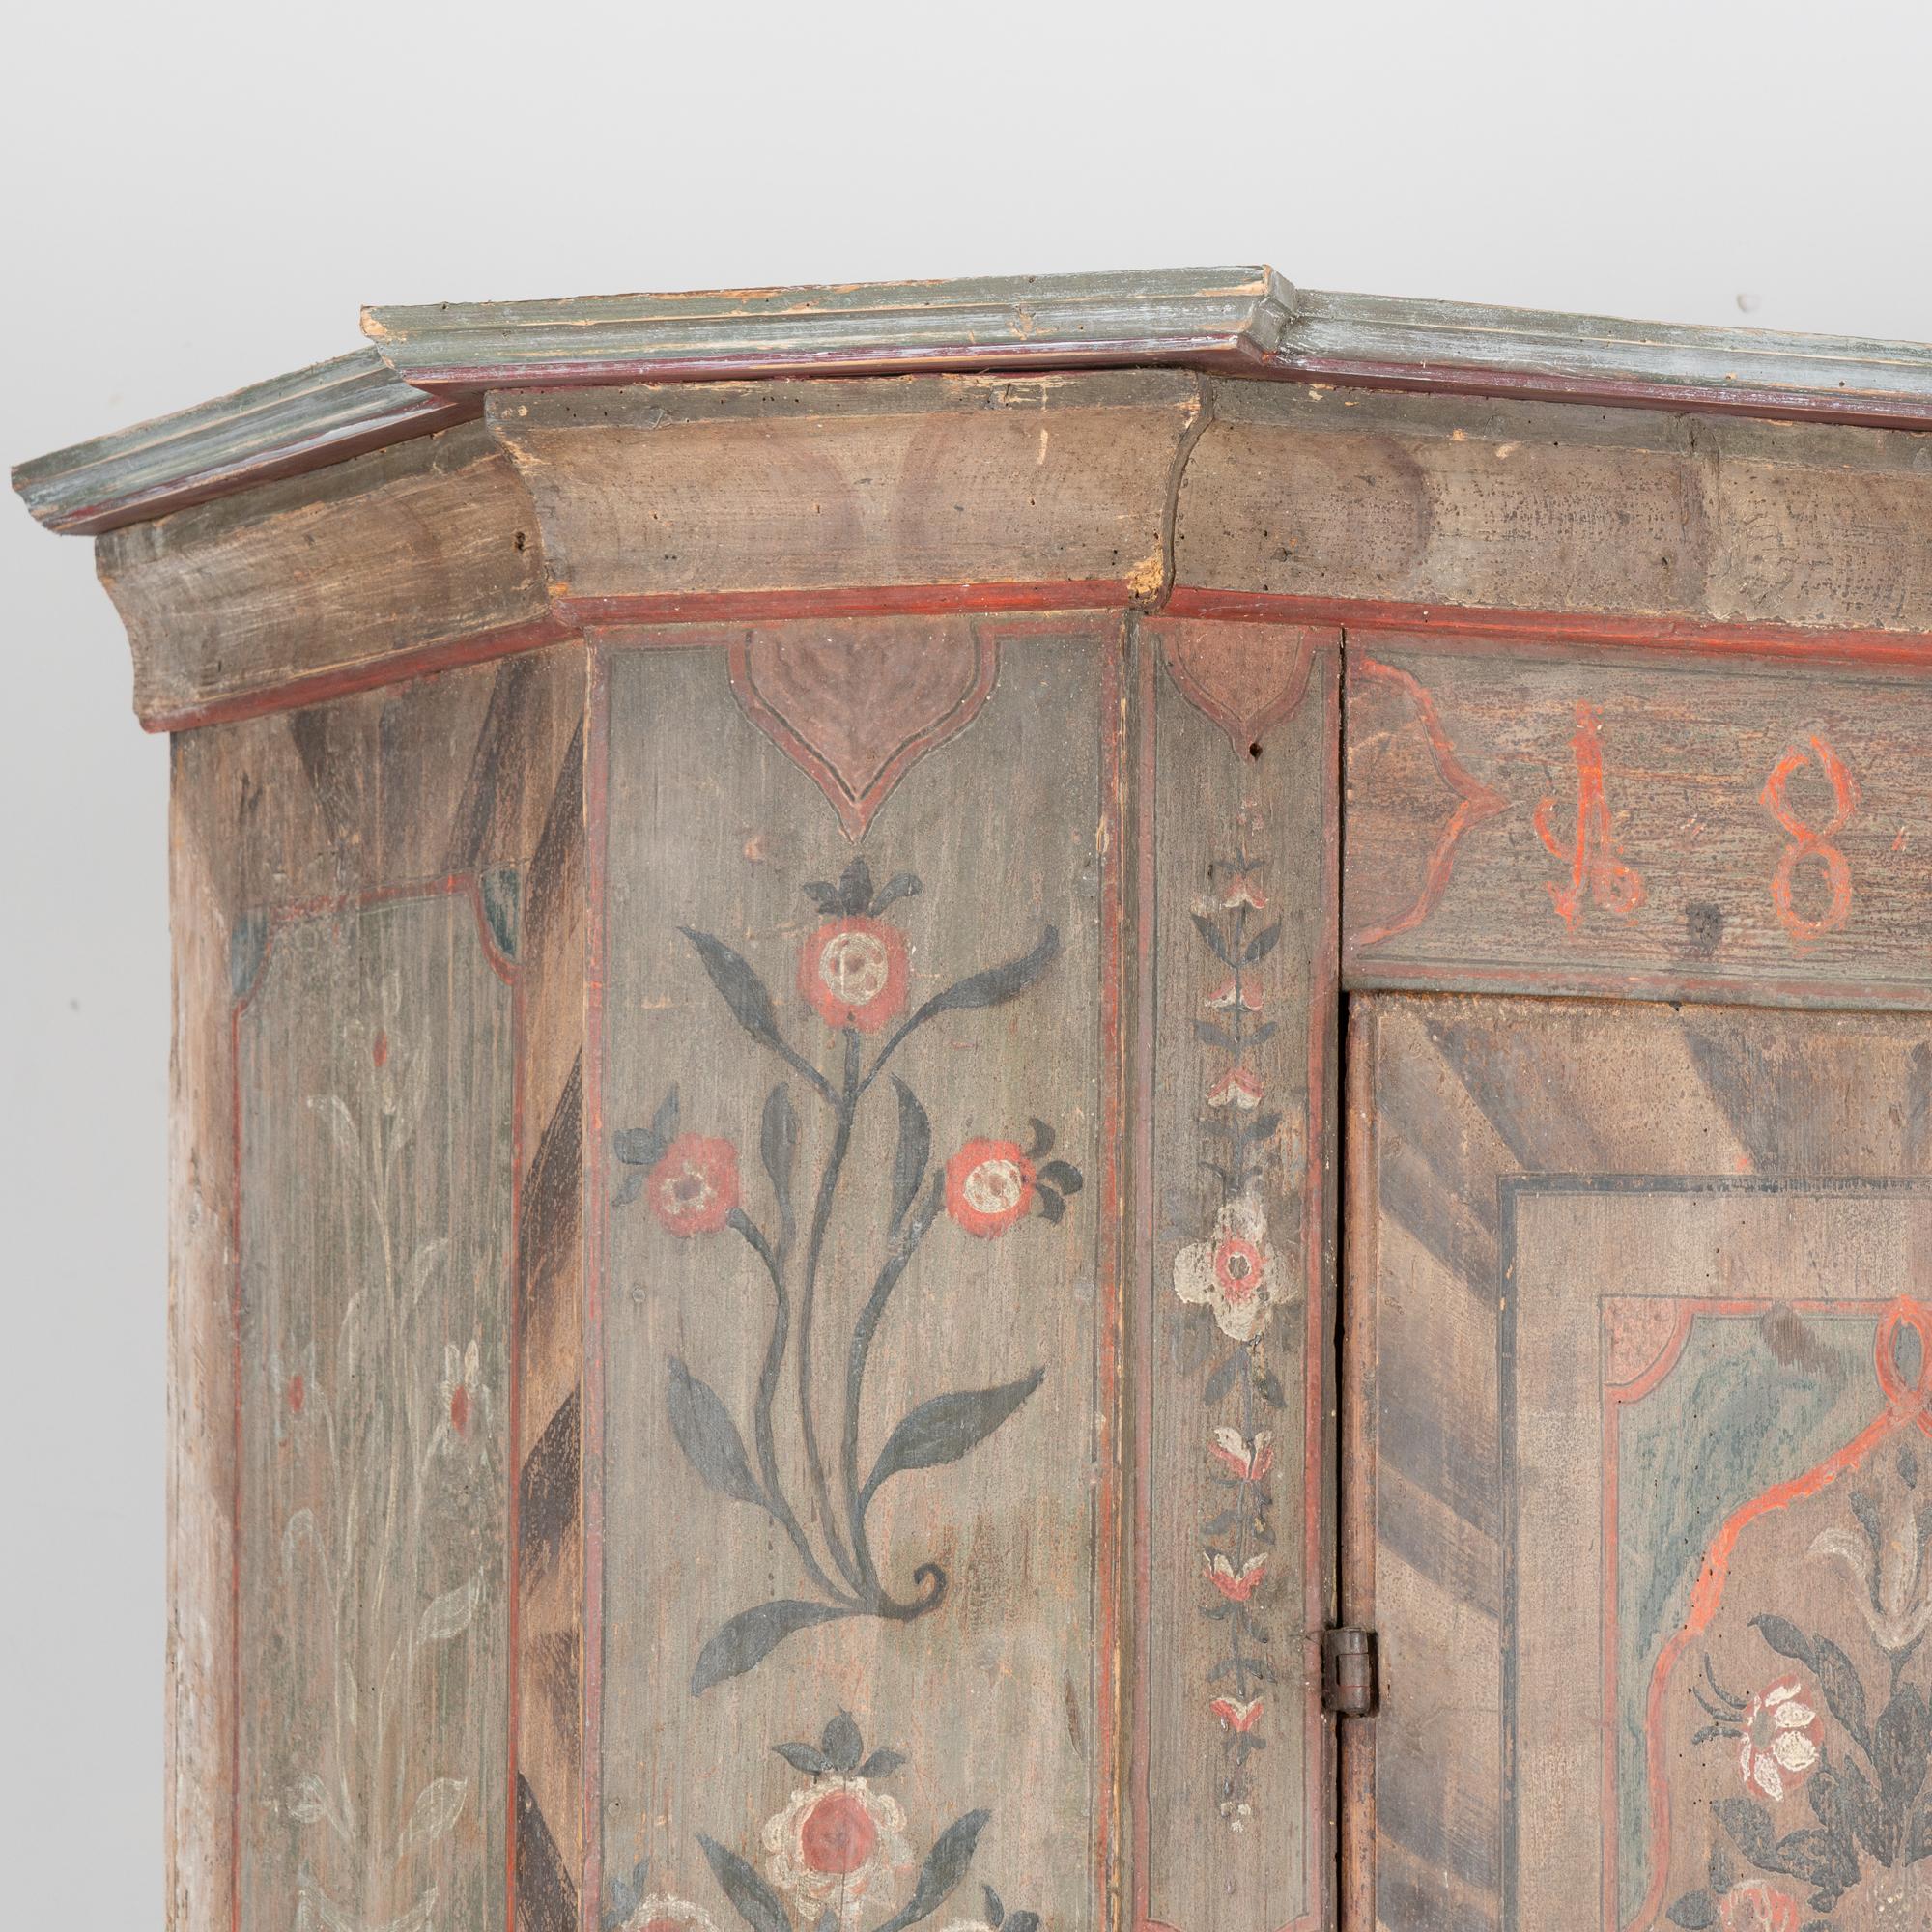 Wood Original Painted Two Door Armoire With Flowers, Austria dated 1804